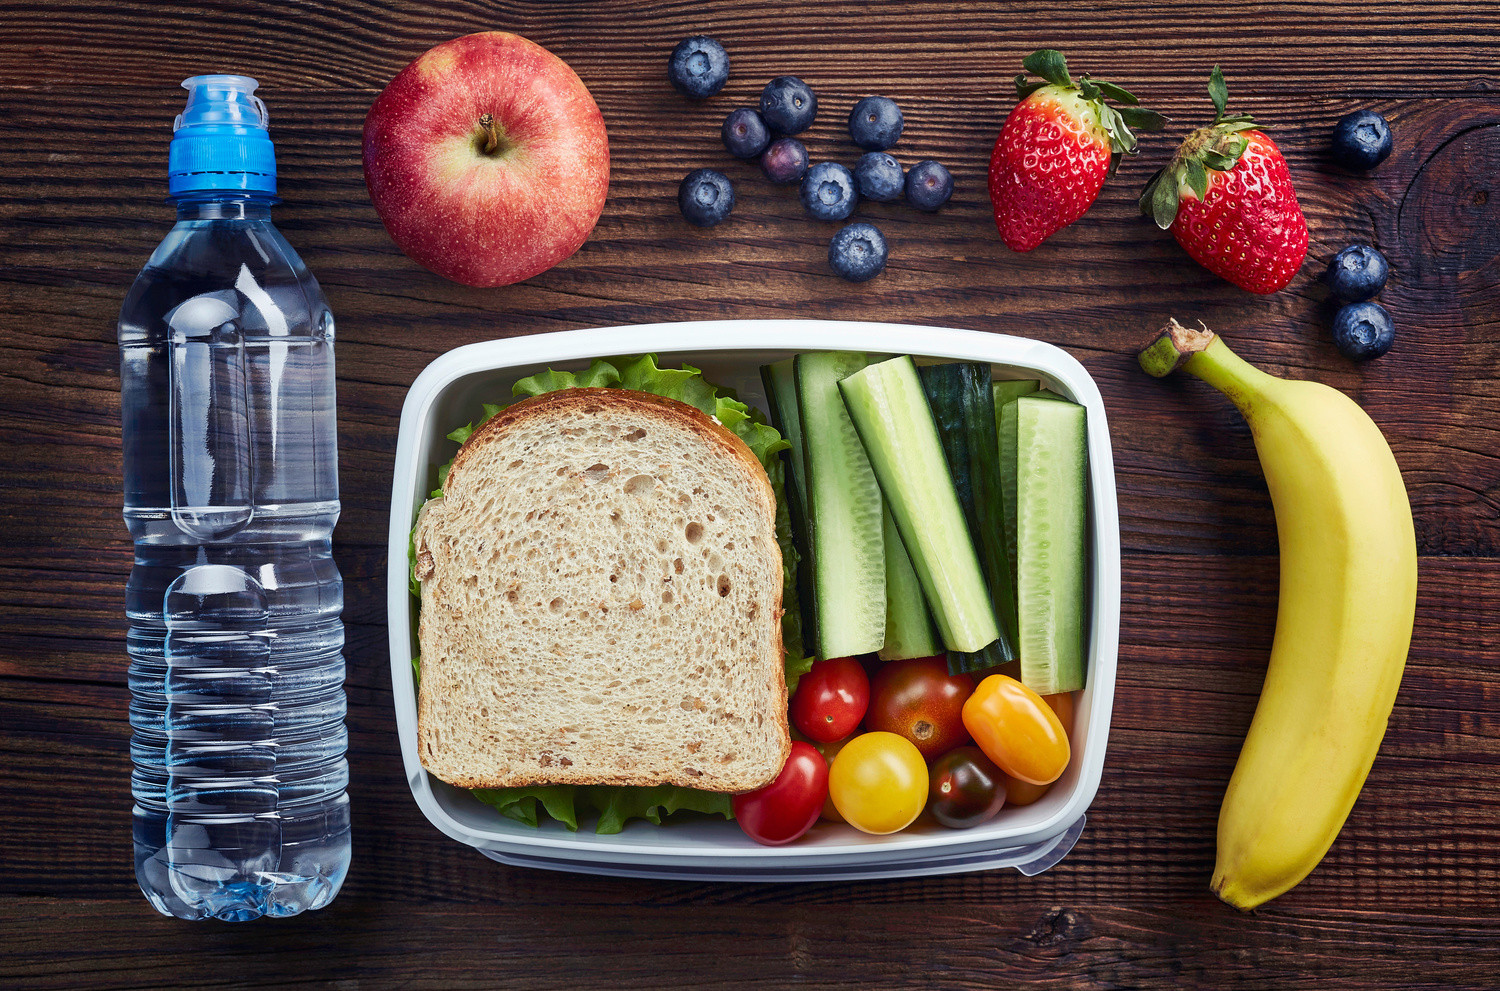 Healthy Foods For Kids School Lunches
 Ways for Parents to Improve Their Children’s School